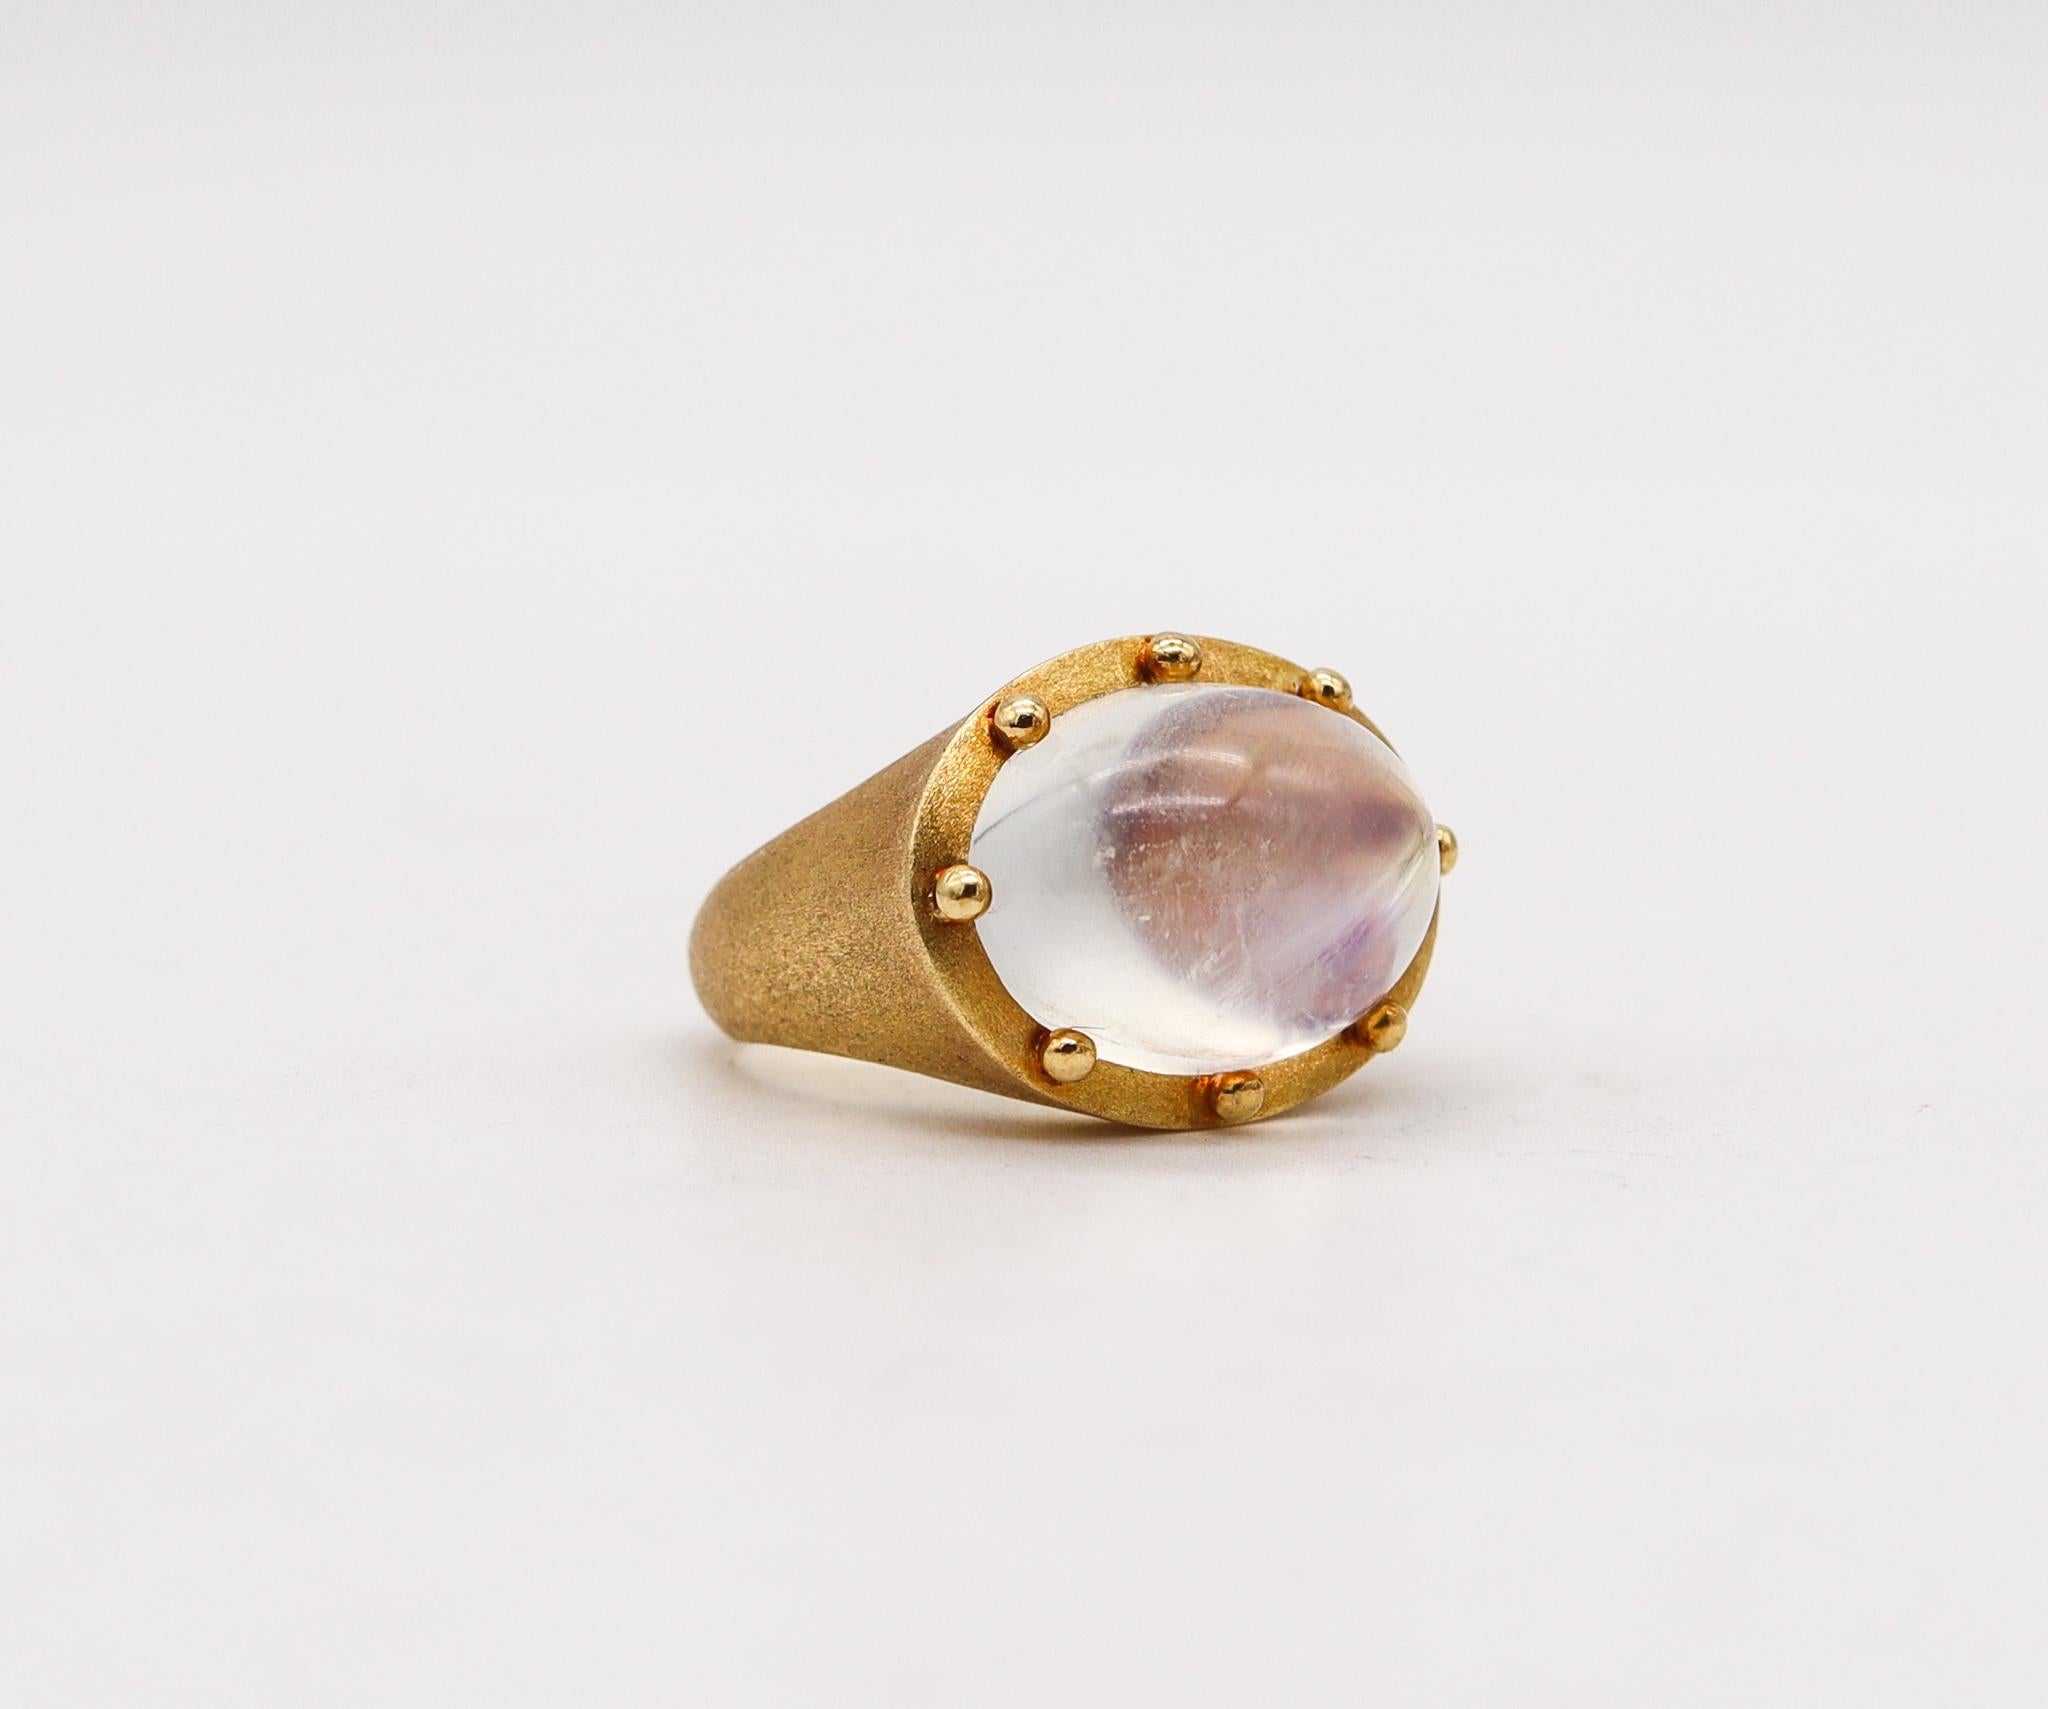 Cocktail ring designed by Temple St. Claire.

Gorgeous cocktail ring created by the jewelry designer Temple St. Claire. This cocktail ring was crafted in solid yellow gold of 18 karats with a thin and delicate brushed finish. Made at her studio